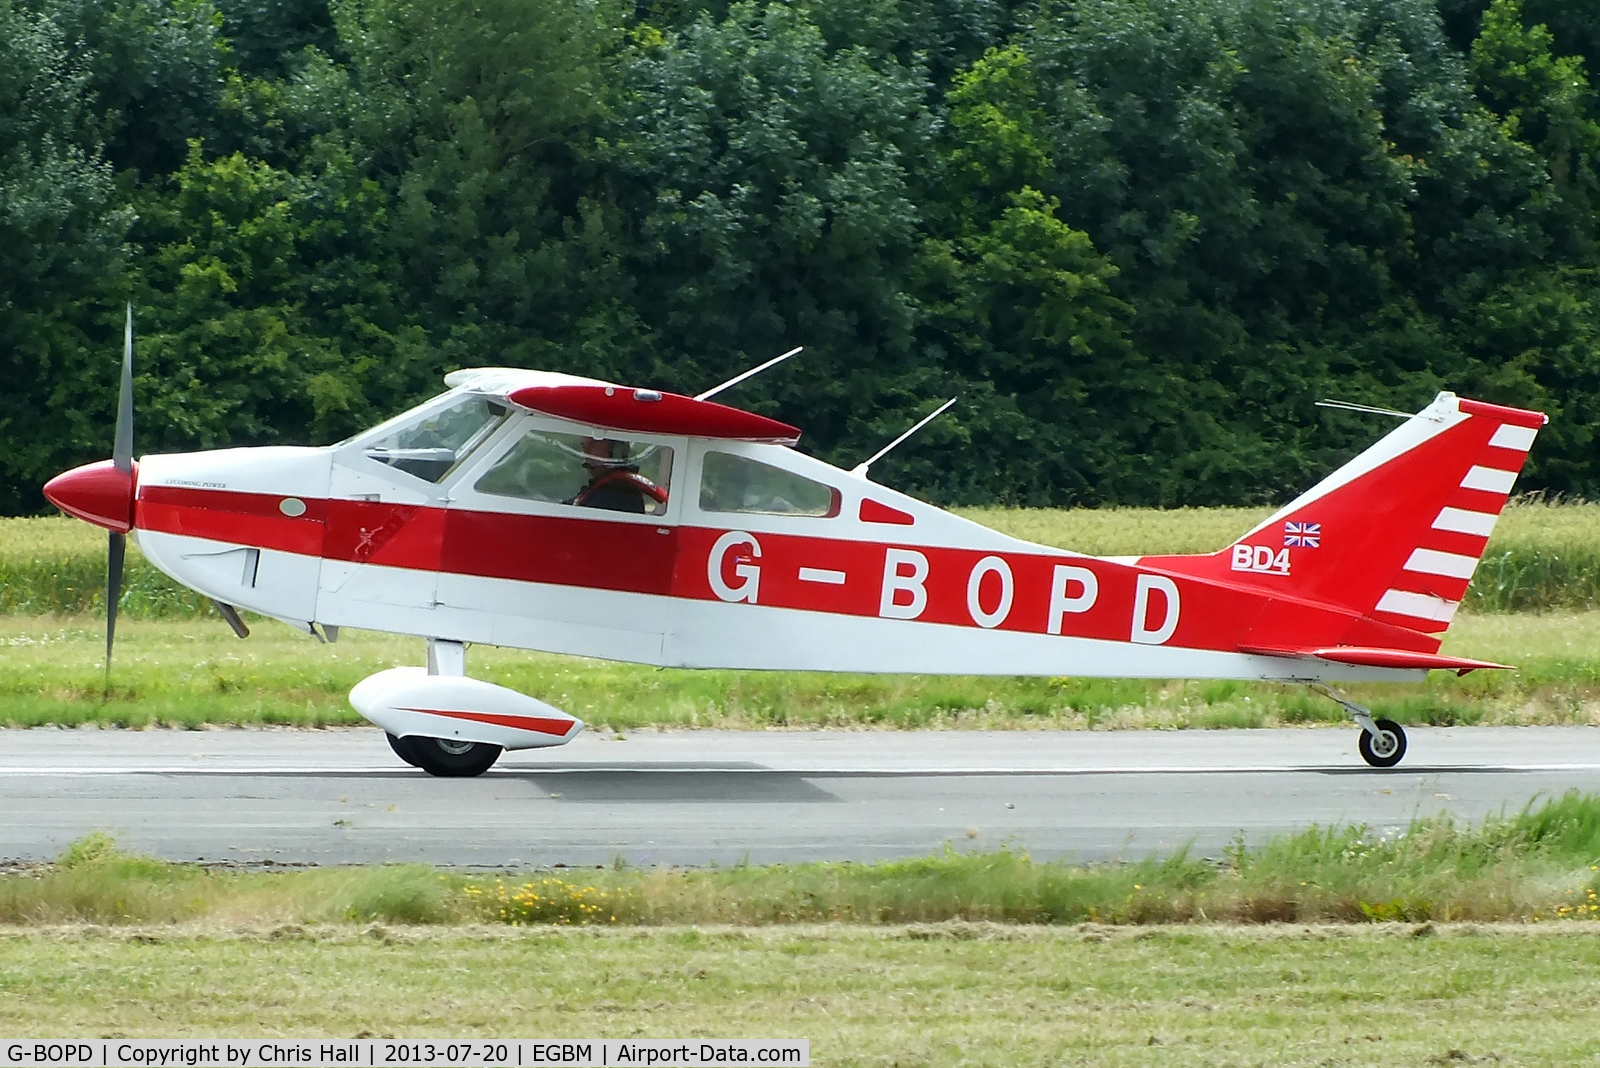 G-BOPD, 1974 Bede BD-4 C/N 632, at the Tatenhill Charity Fly in